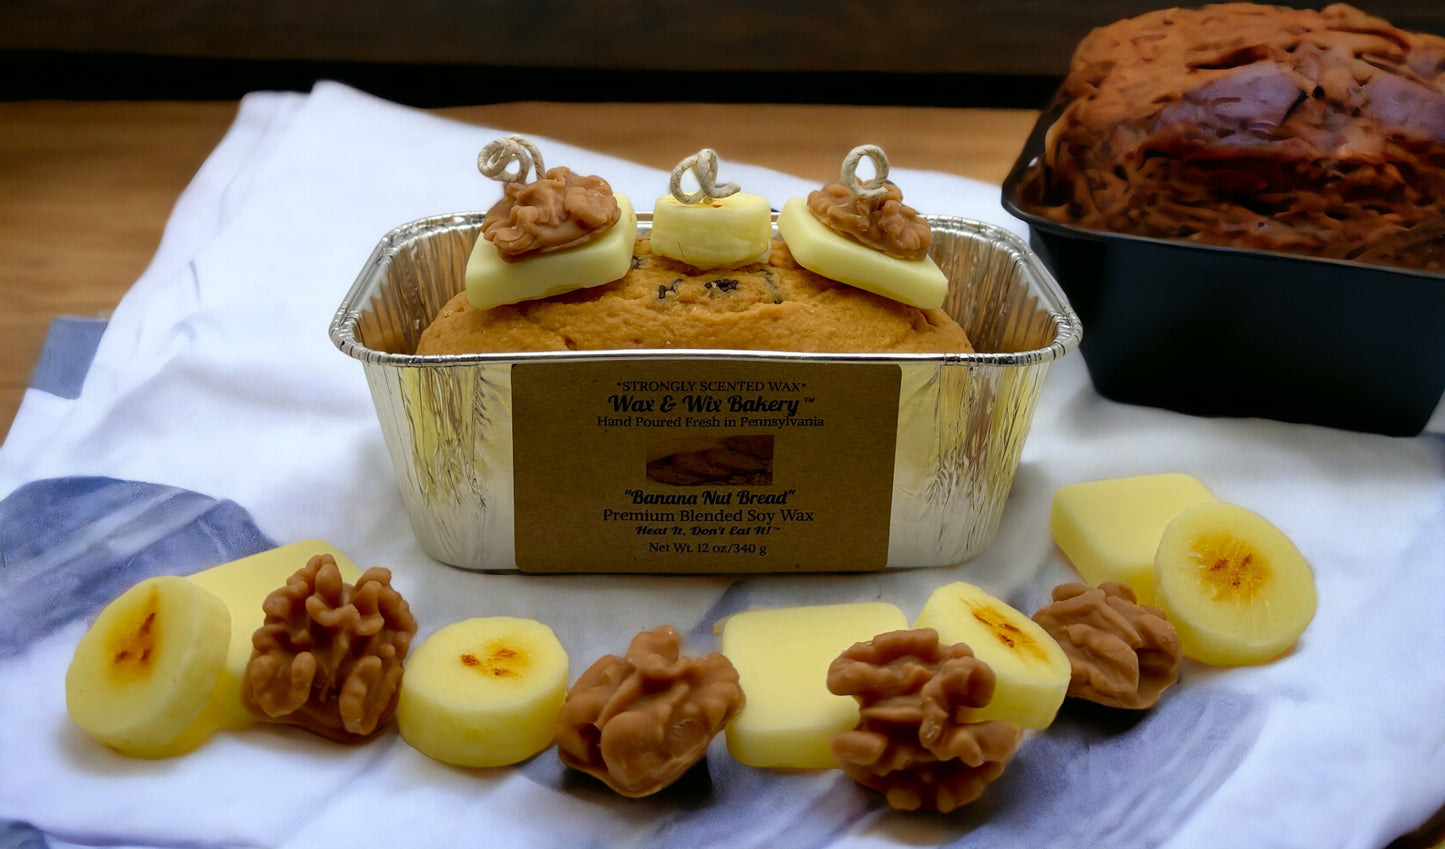 Large Banana Nut Bread Loaf Pan Candle. Soy Wax Candle. 3 Wick Candle. Strongly Scented Candle. 13 Ounces